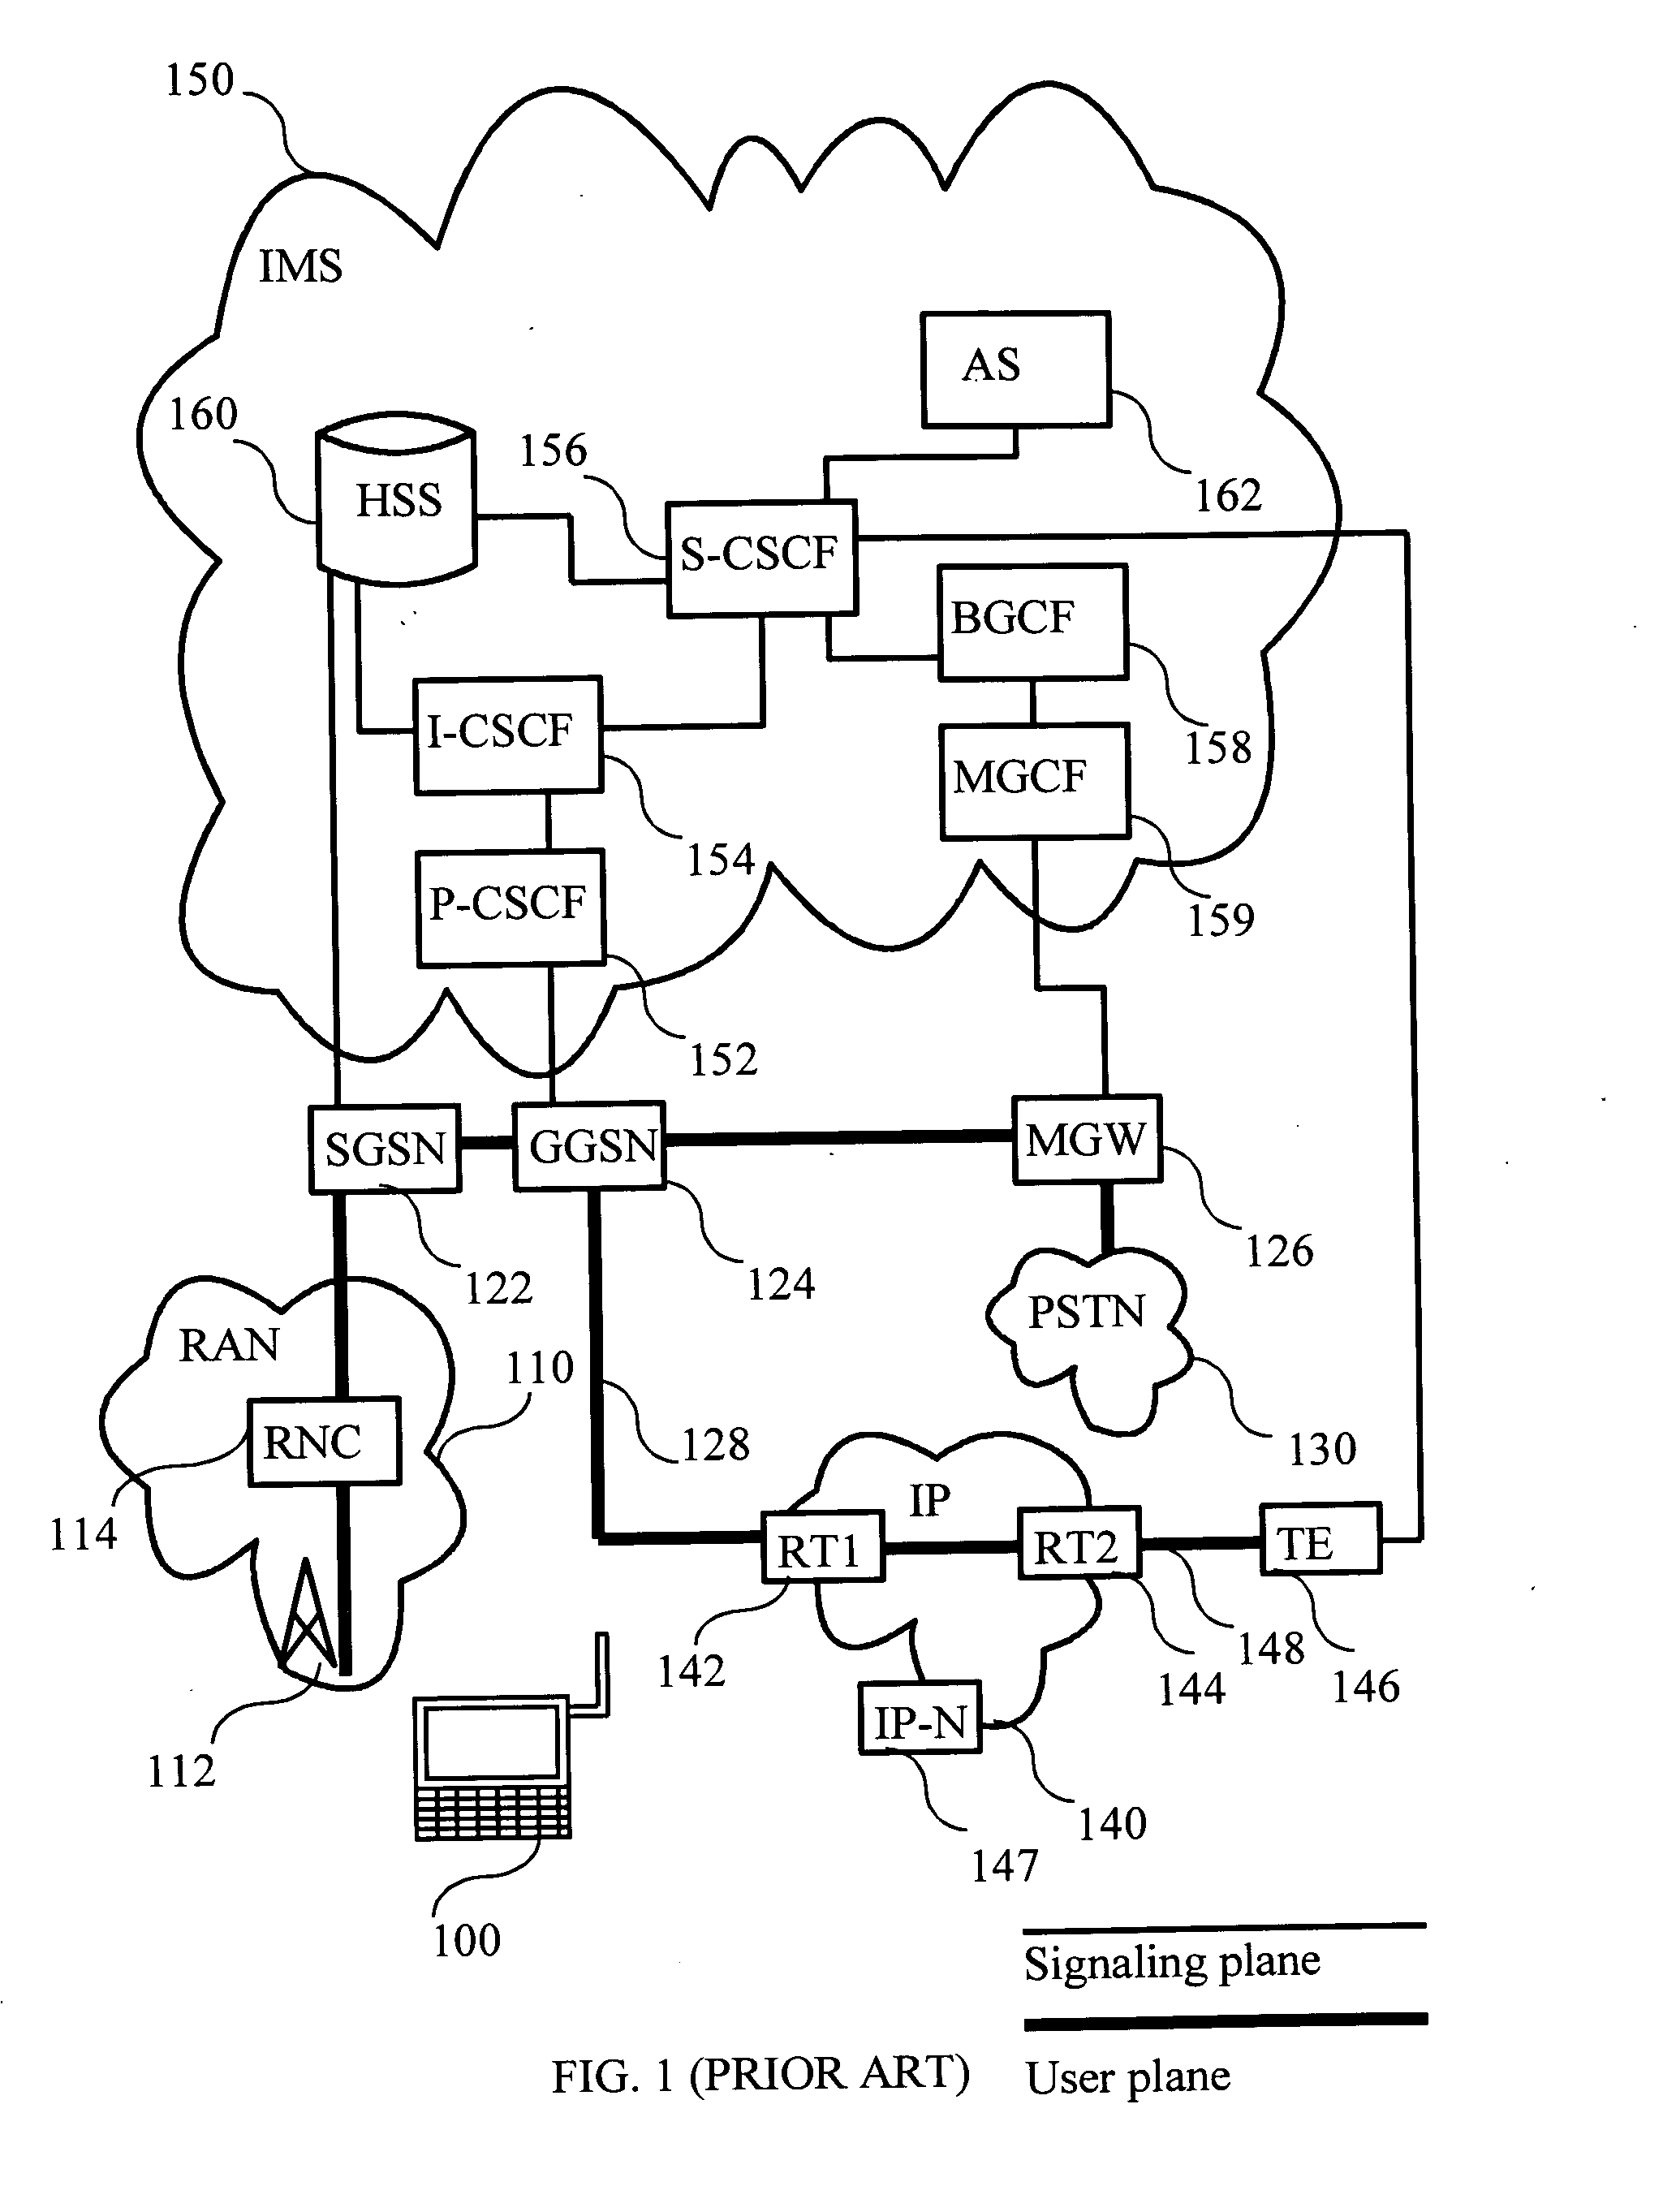 Method for the transfer of information during handovers in a communication system